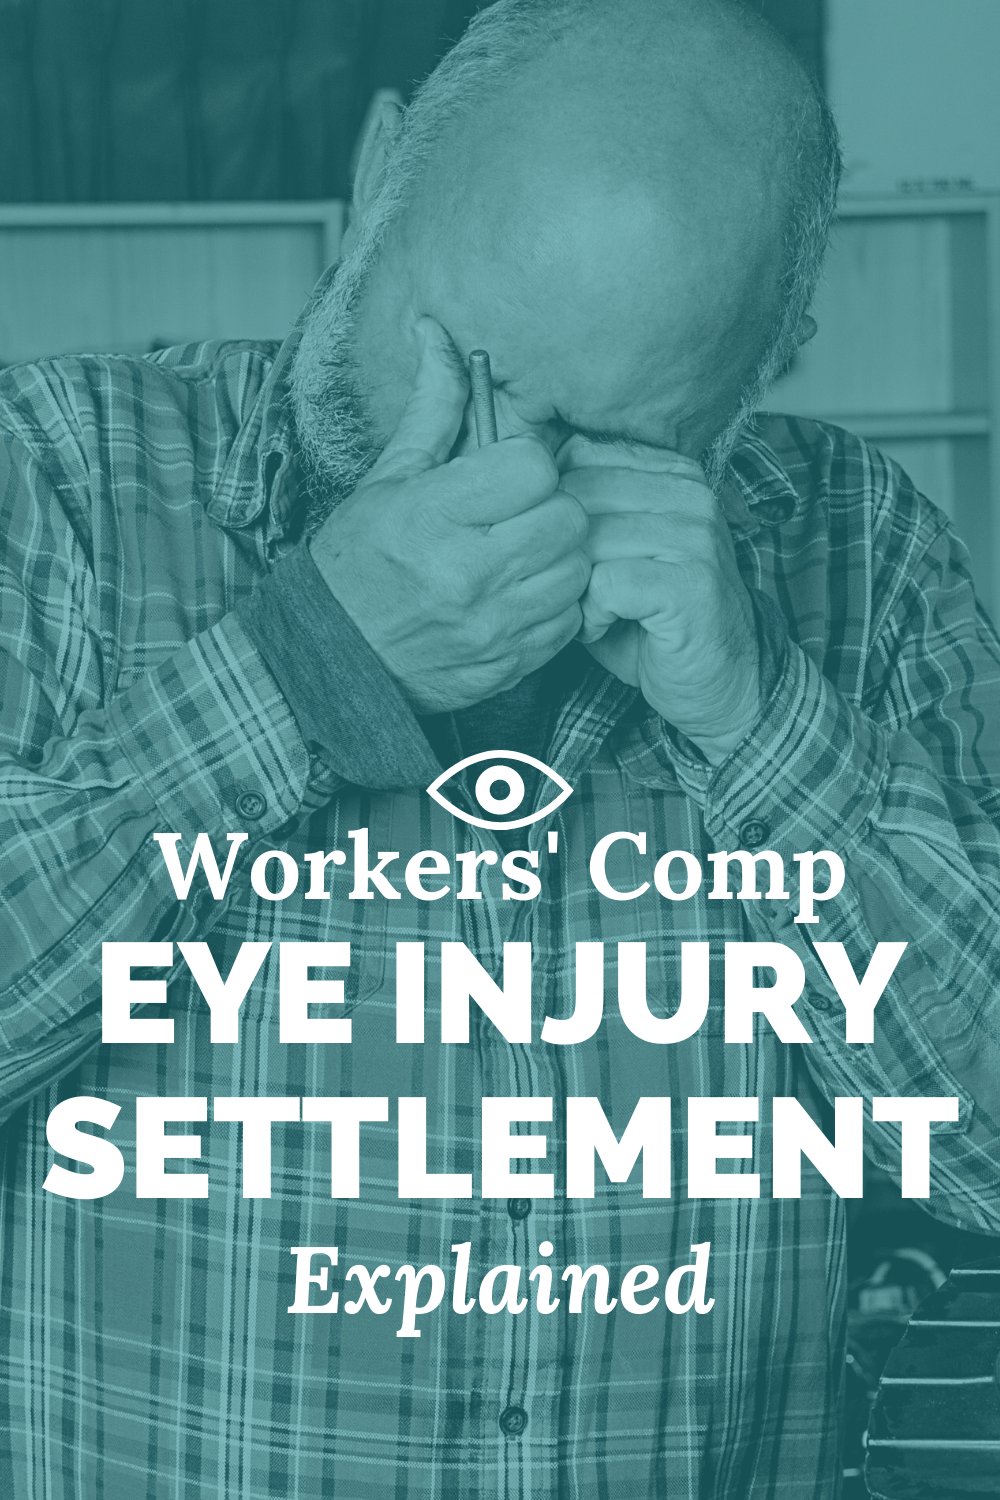 Workers’ Comp Eye Injury Settlement Explained